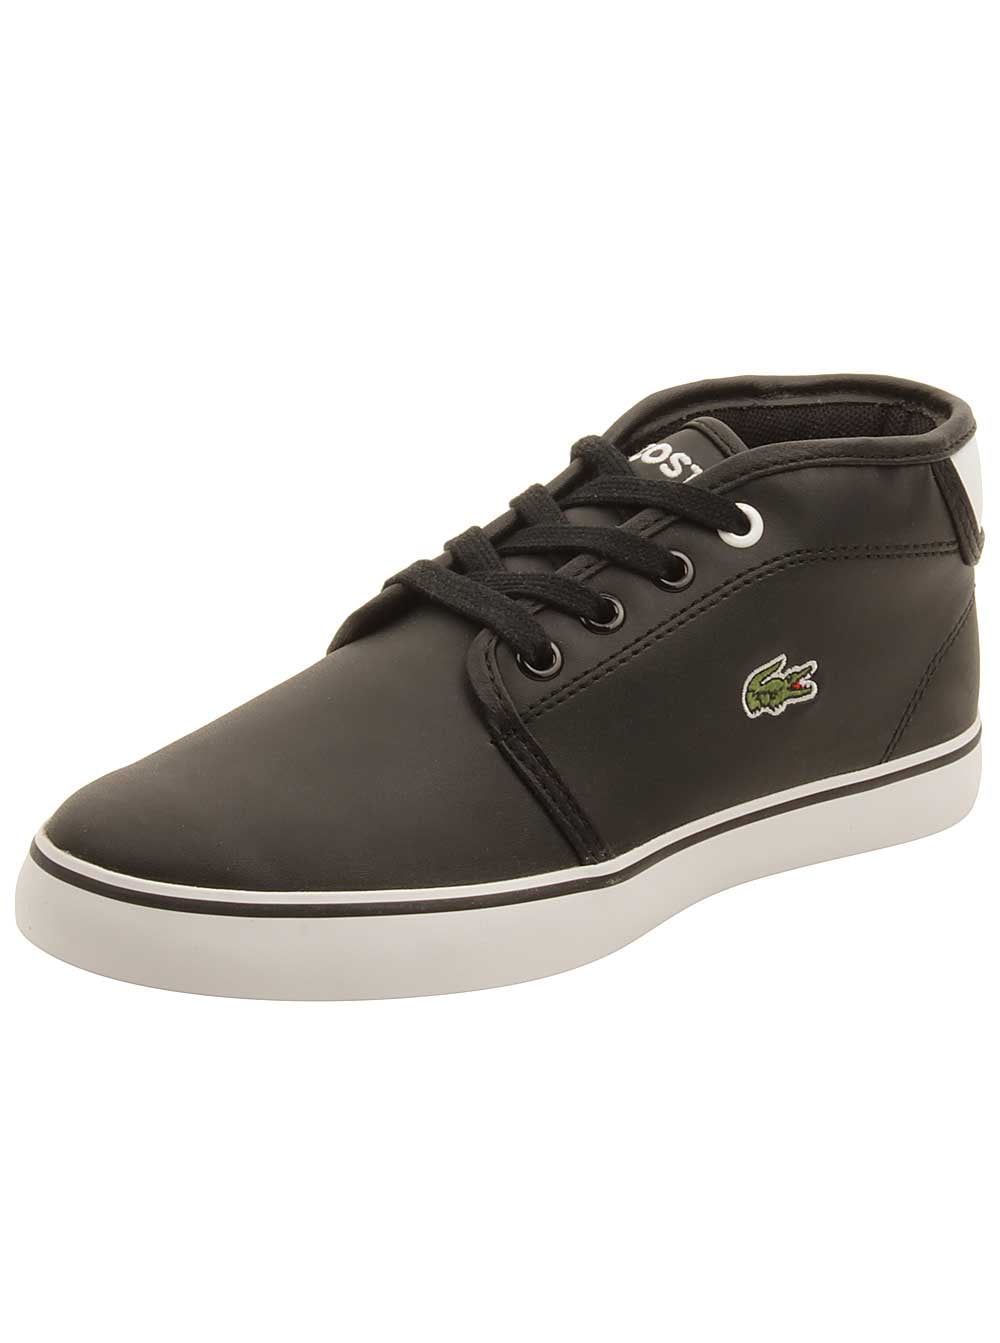 Lacoste Toddler 117 Sneakers Black/White -